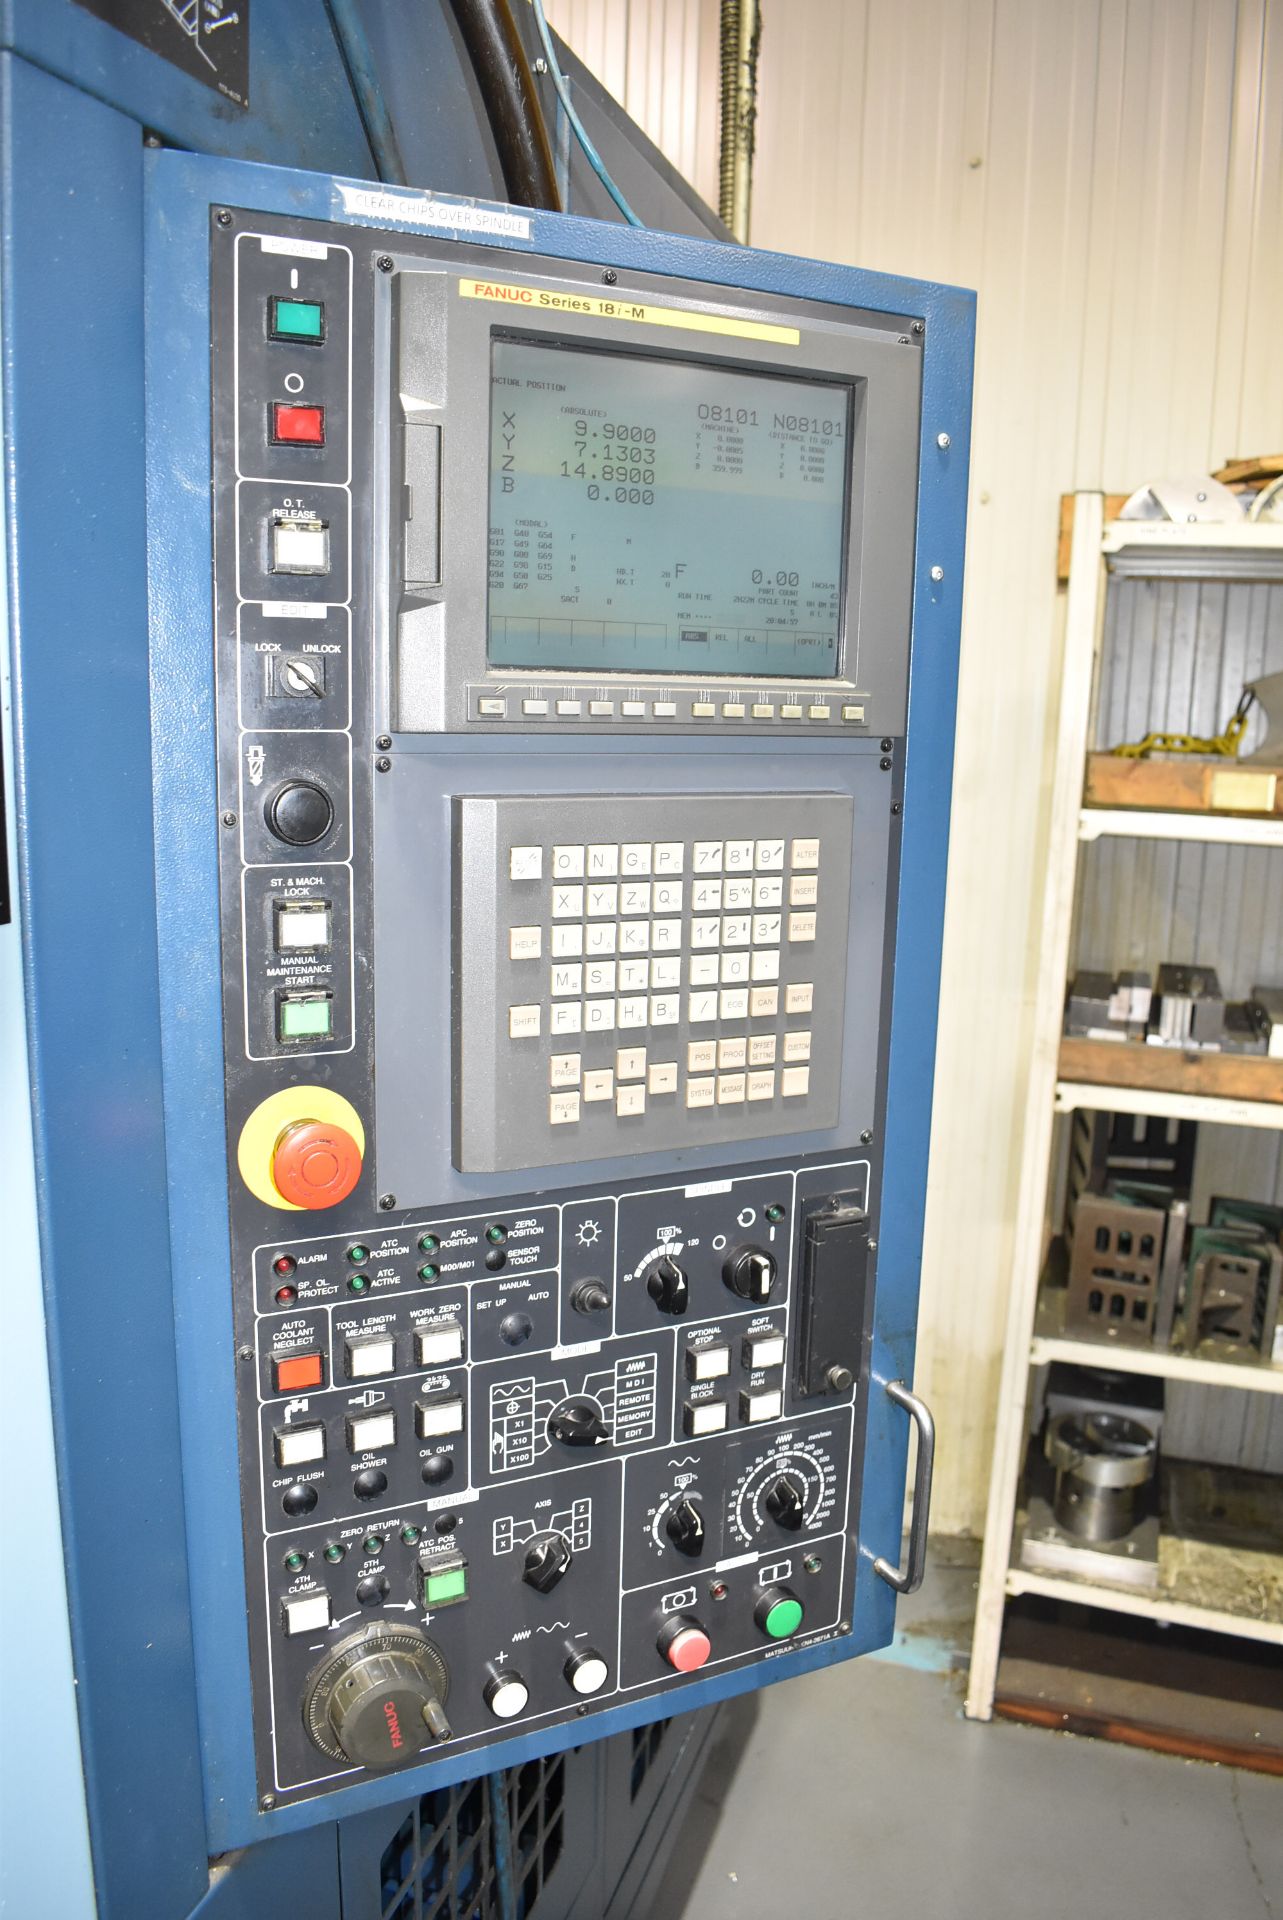 MATSUURA (2000) ES 450 H2 TWIN-PALLET HIGH-SPEED CNC HORIZONTAL MACHINING CENTER WITH FANUC SERIES - Image 5 of 13